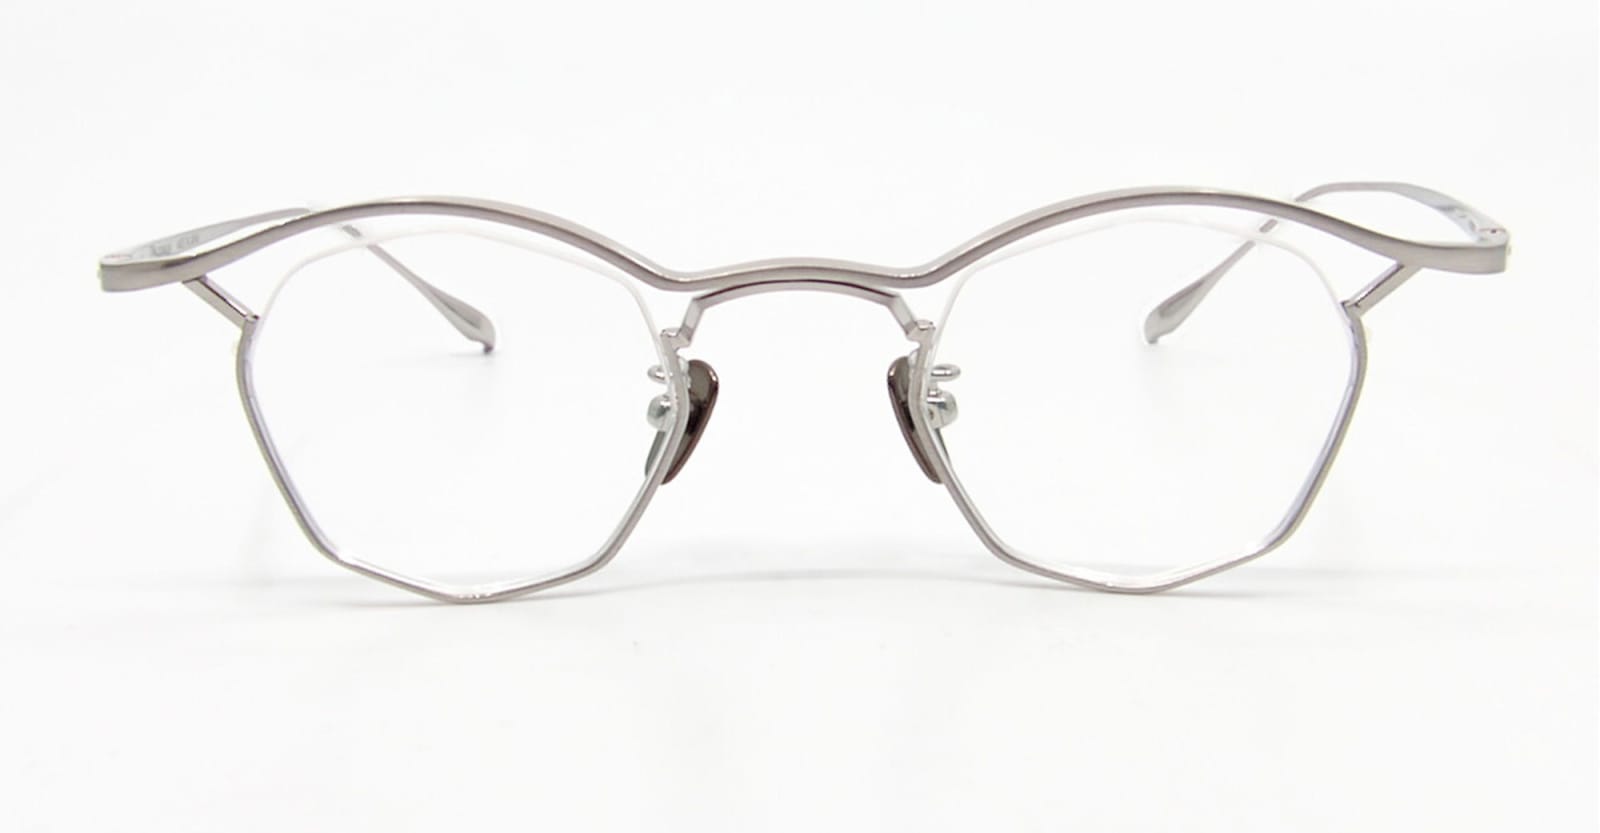 FACTORY900 Titanos X Factory900 Mf-002 - Silver Rx Glasses